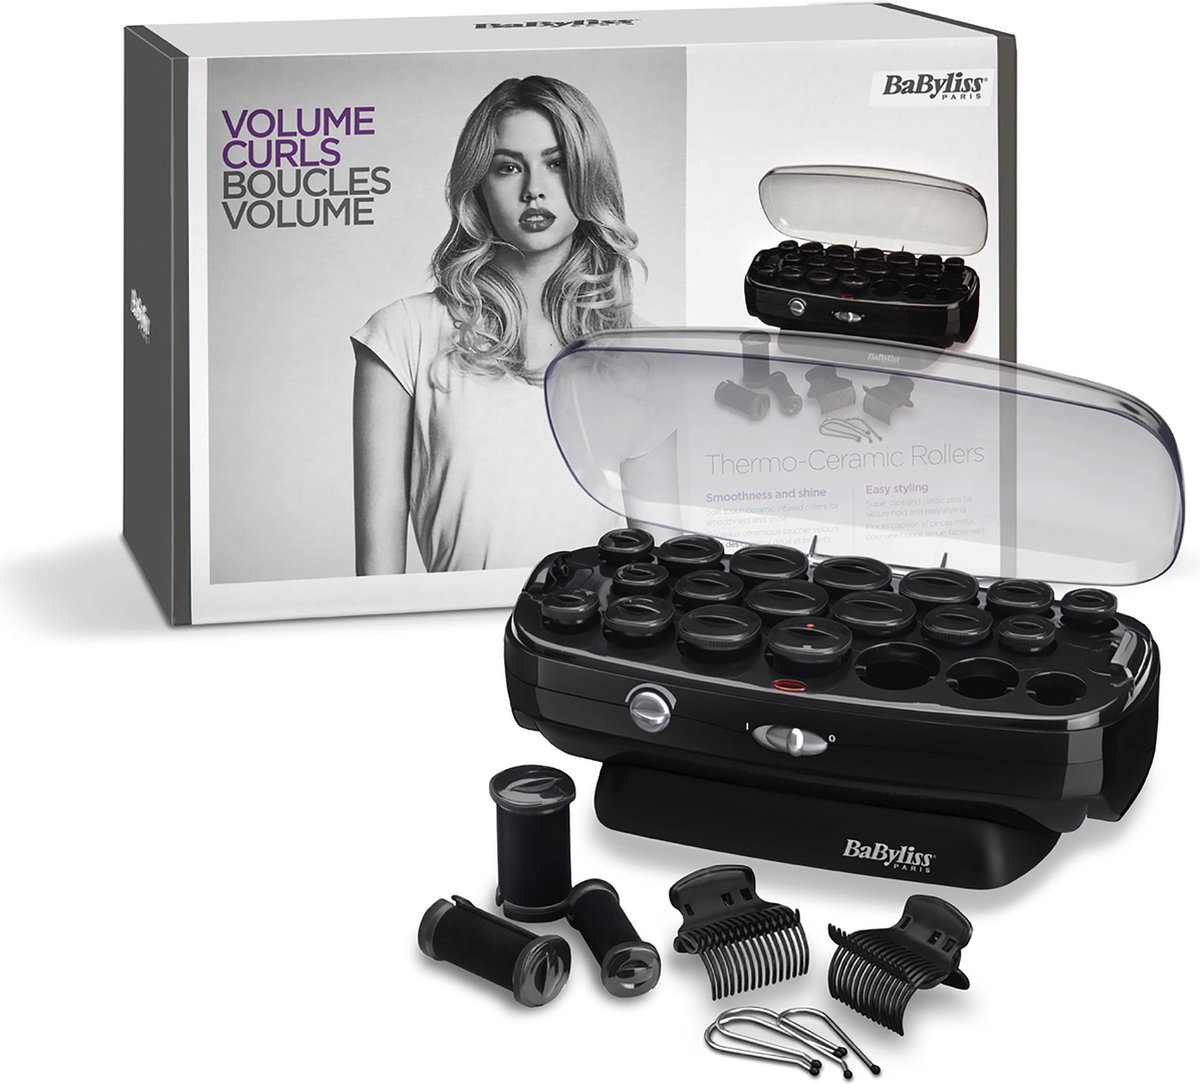 Umeki Afwijzen opwinding BaByliss ® Thermo-Ceramic Rollers RS035E - Krulset | DGM Outlet